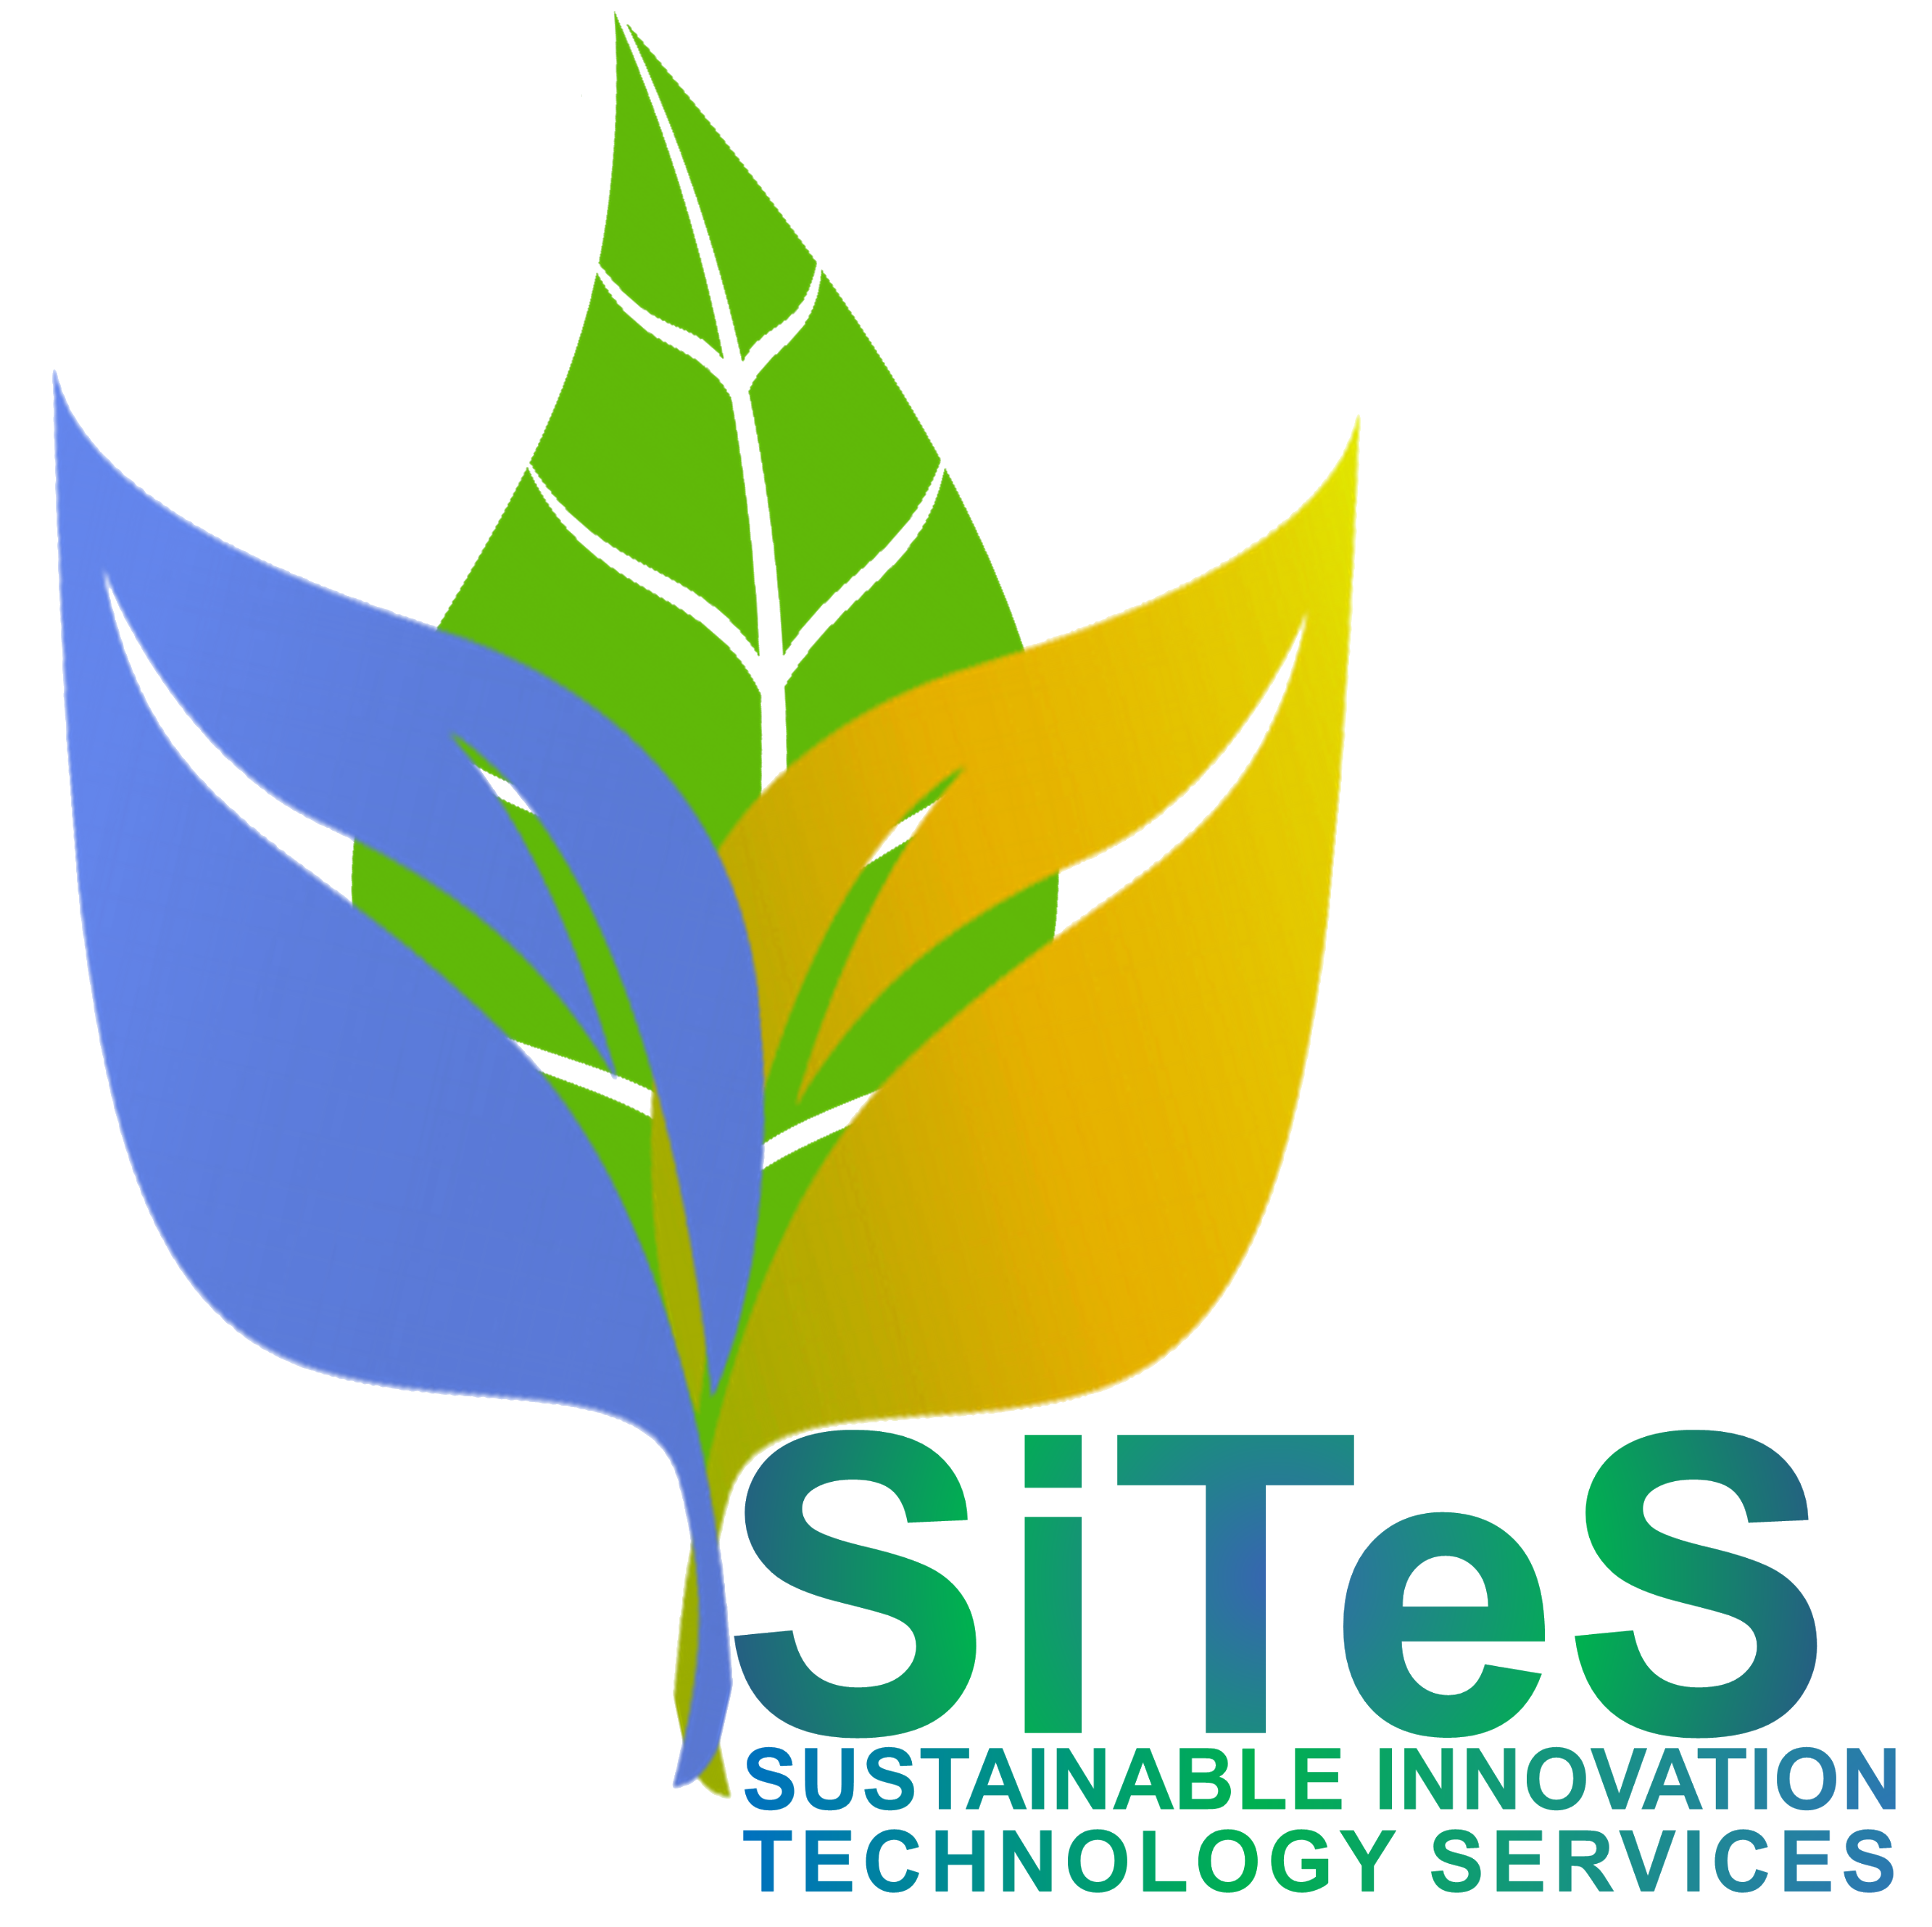 Sustainable Innovation Technology Services (SiTeS)